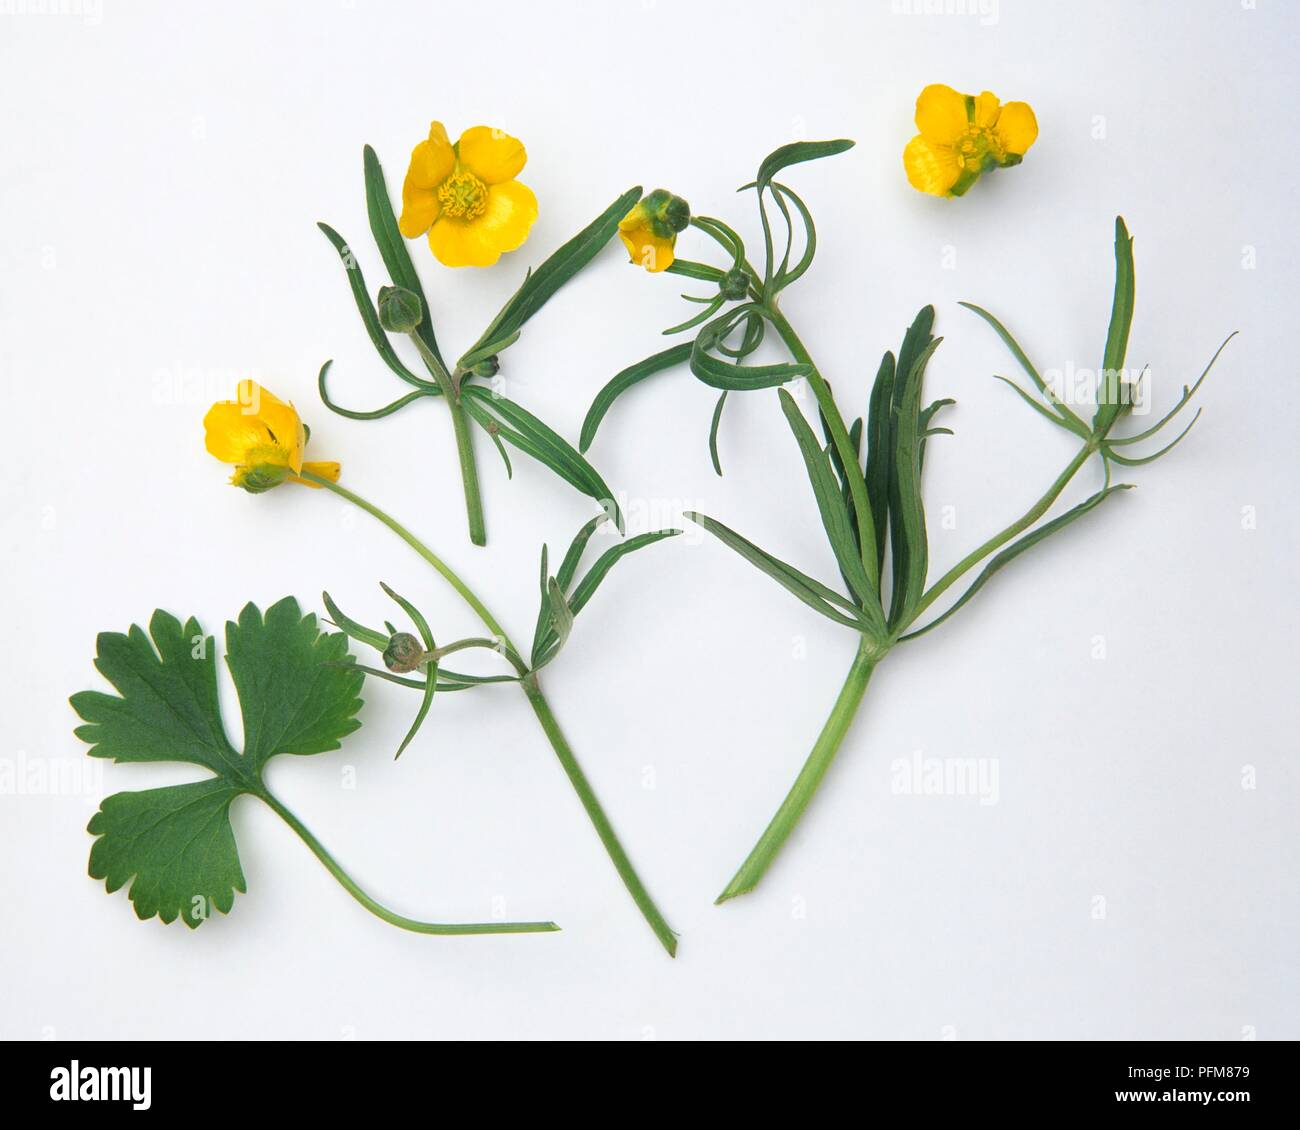 Ranunculus auricomus (Goldilocks), stems with yellow flowers and lobed leaves Stock Photo